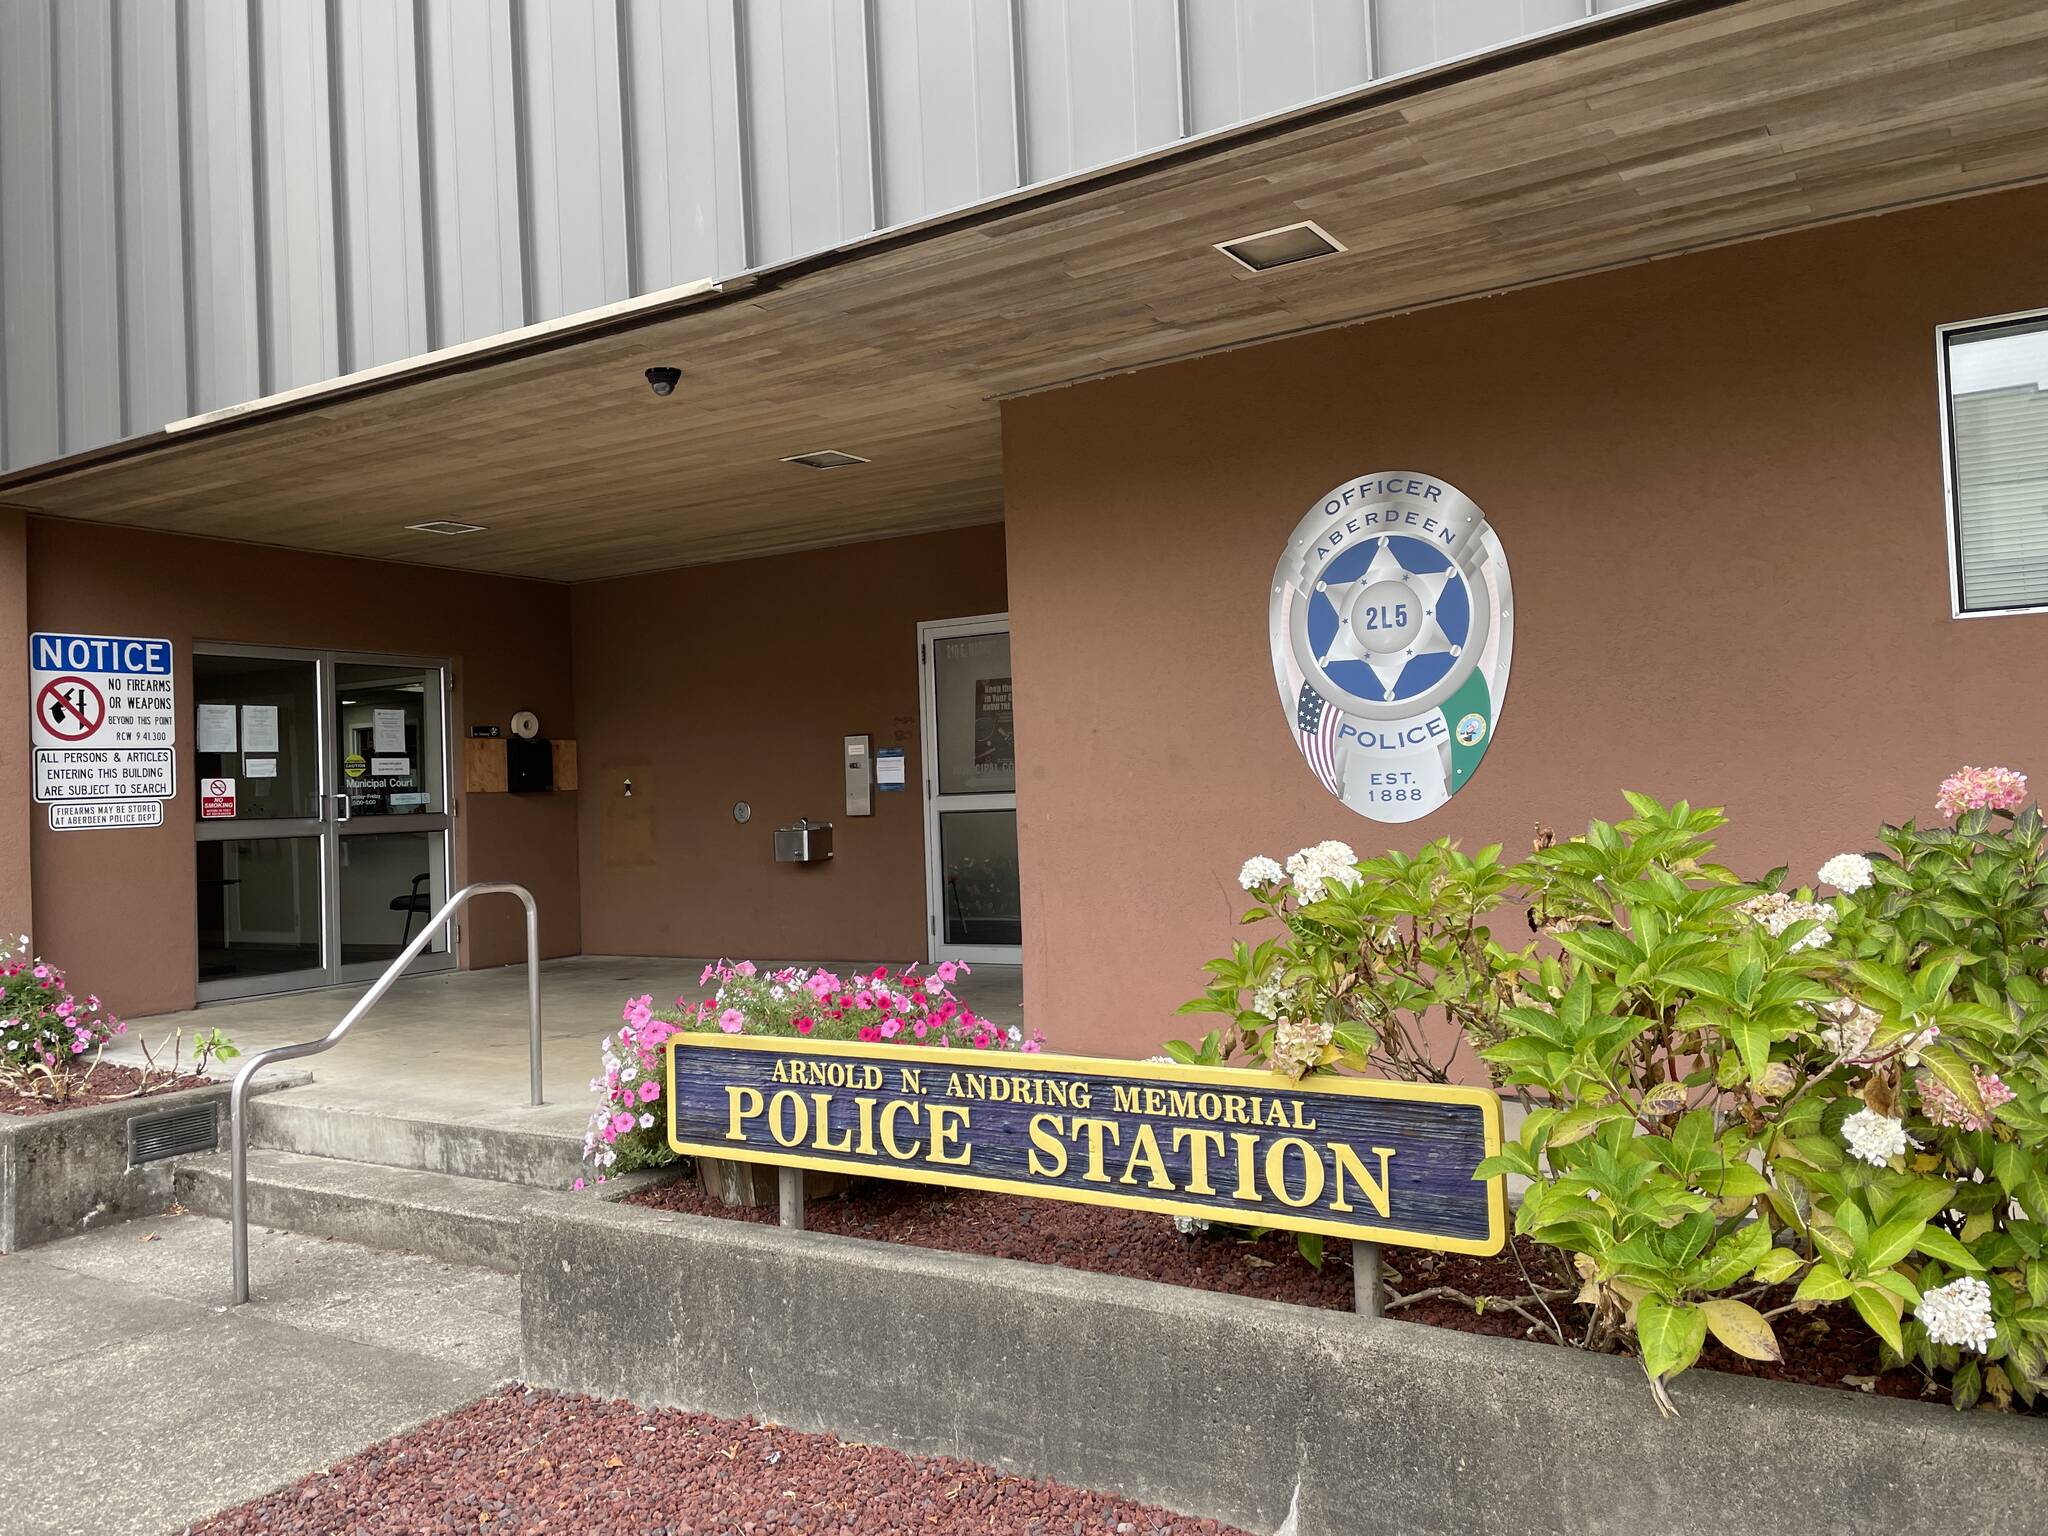 An 18-year-old male was arrested by the Aberdeen Police Department Tuesday, Dec. 6 following an incident involving harassment and indecent exposure near an Aberdeen junior high school. (Michael S. Lockett / The Daily World)